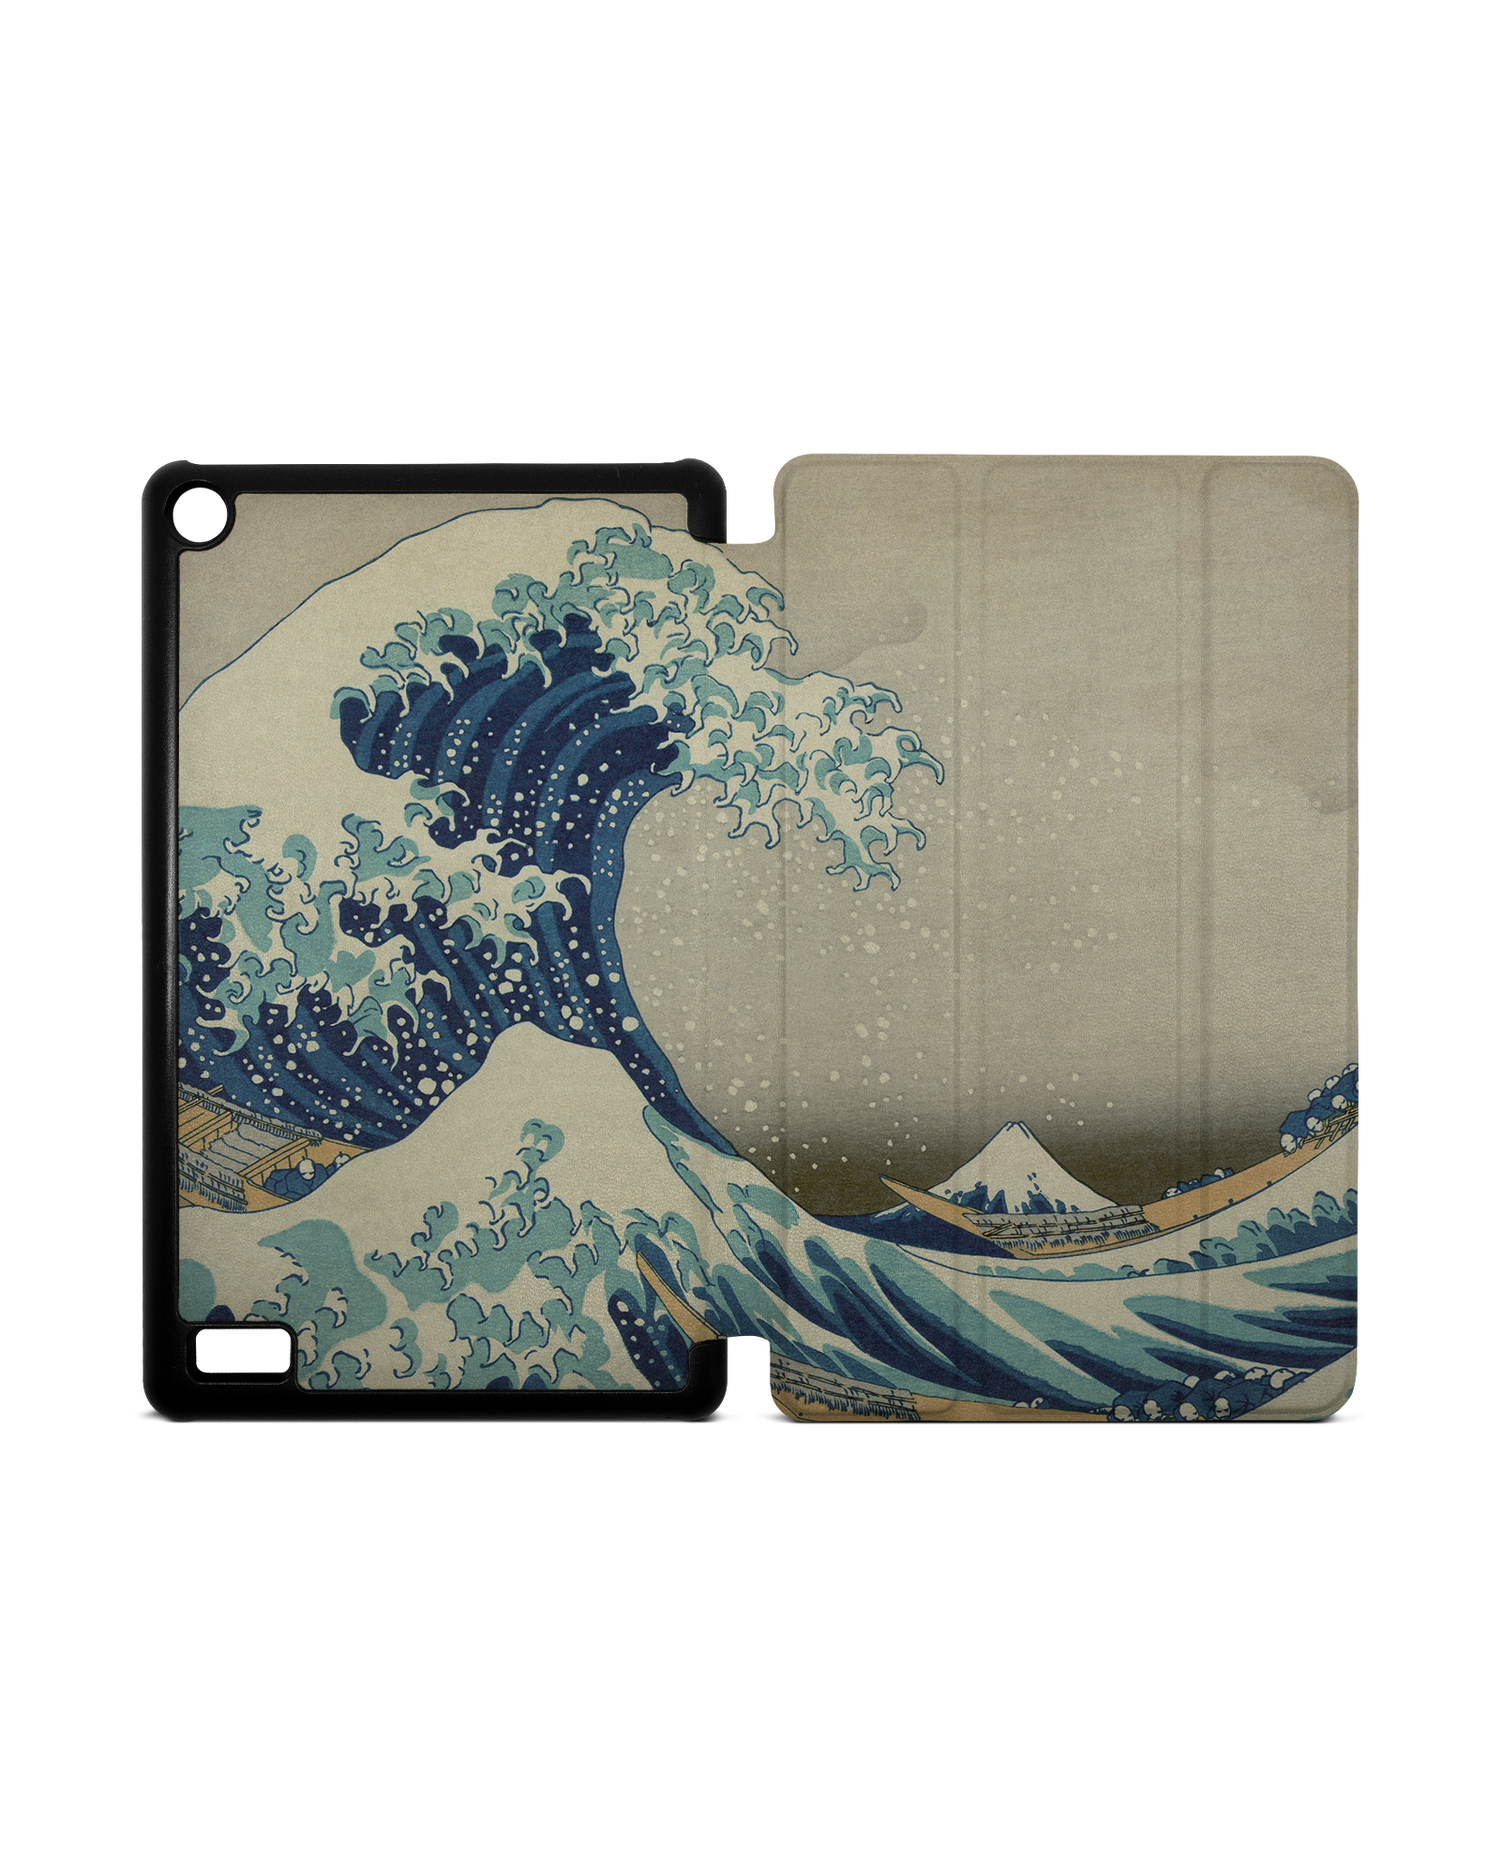 Great Wave Off Kanagawa By Hokusai Tablet Smart Case for Amazon Fire 7: Opened